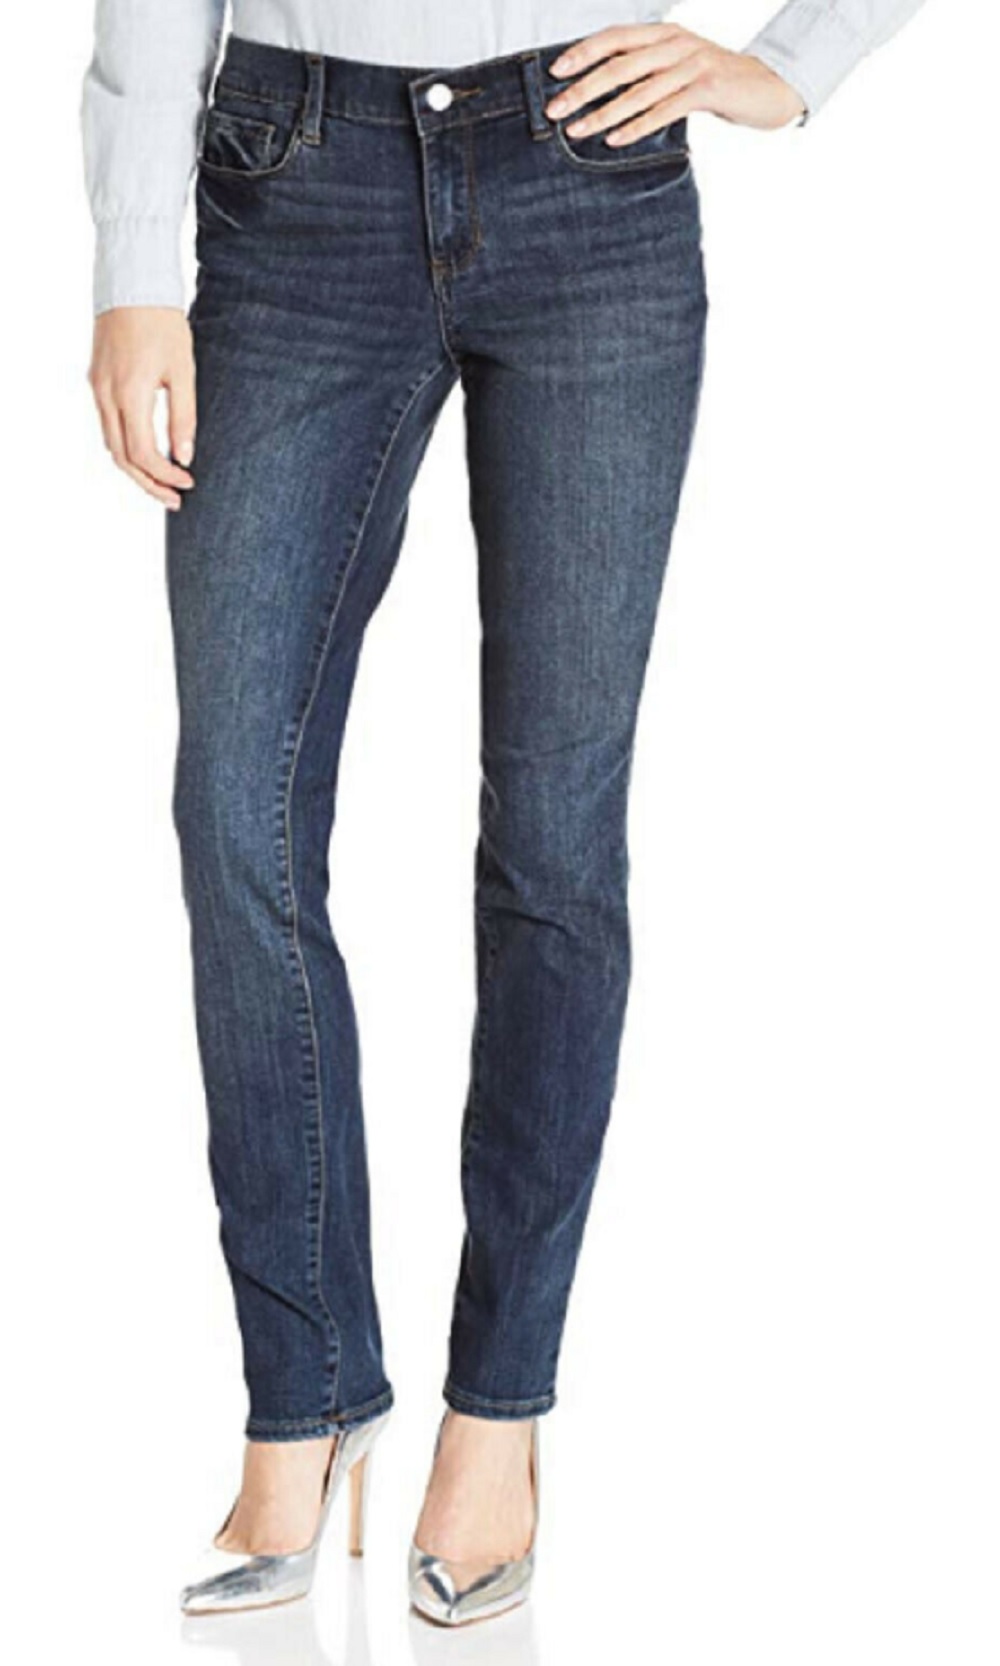 DKNY Jeans Ladies' Soho Classic Skinny Jeans Chelsea Wash (2x32) - image 1 of 2